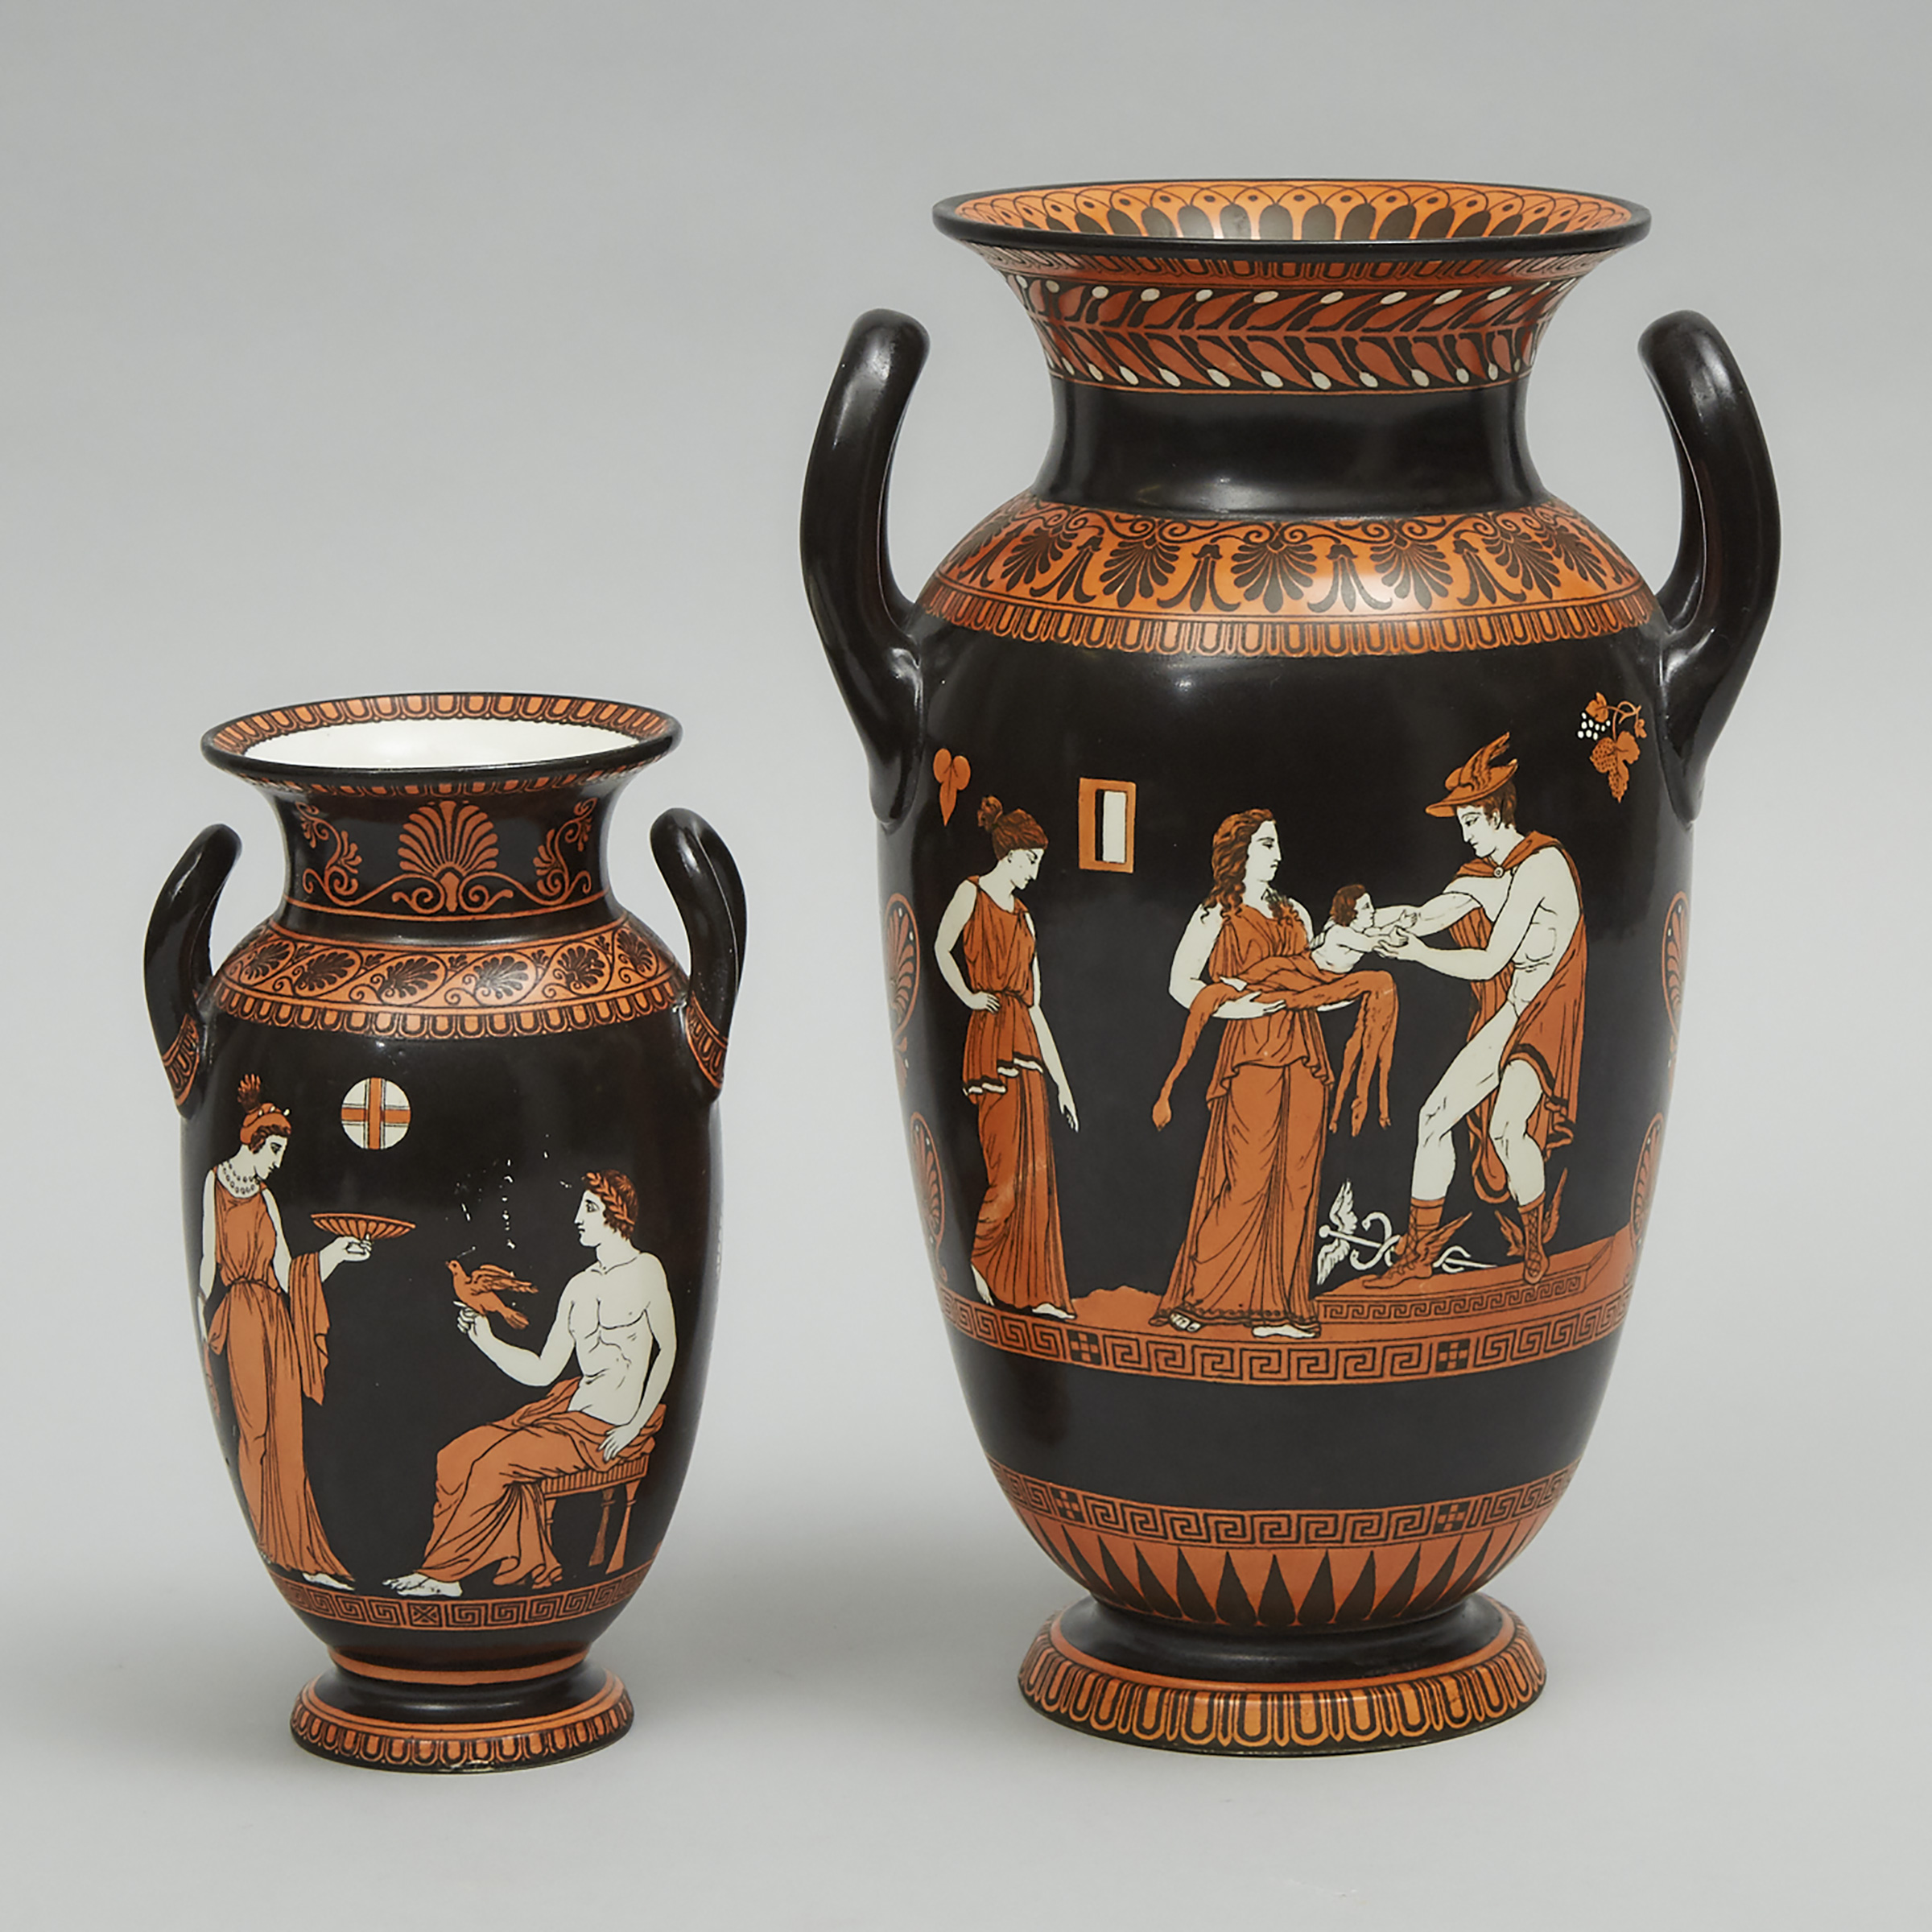 Two Samuel Alcock & Co. after the Antique Greek Style English Porcelain Vases, 19th century